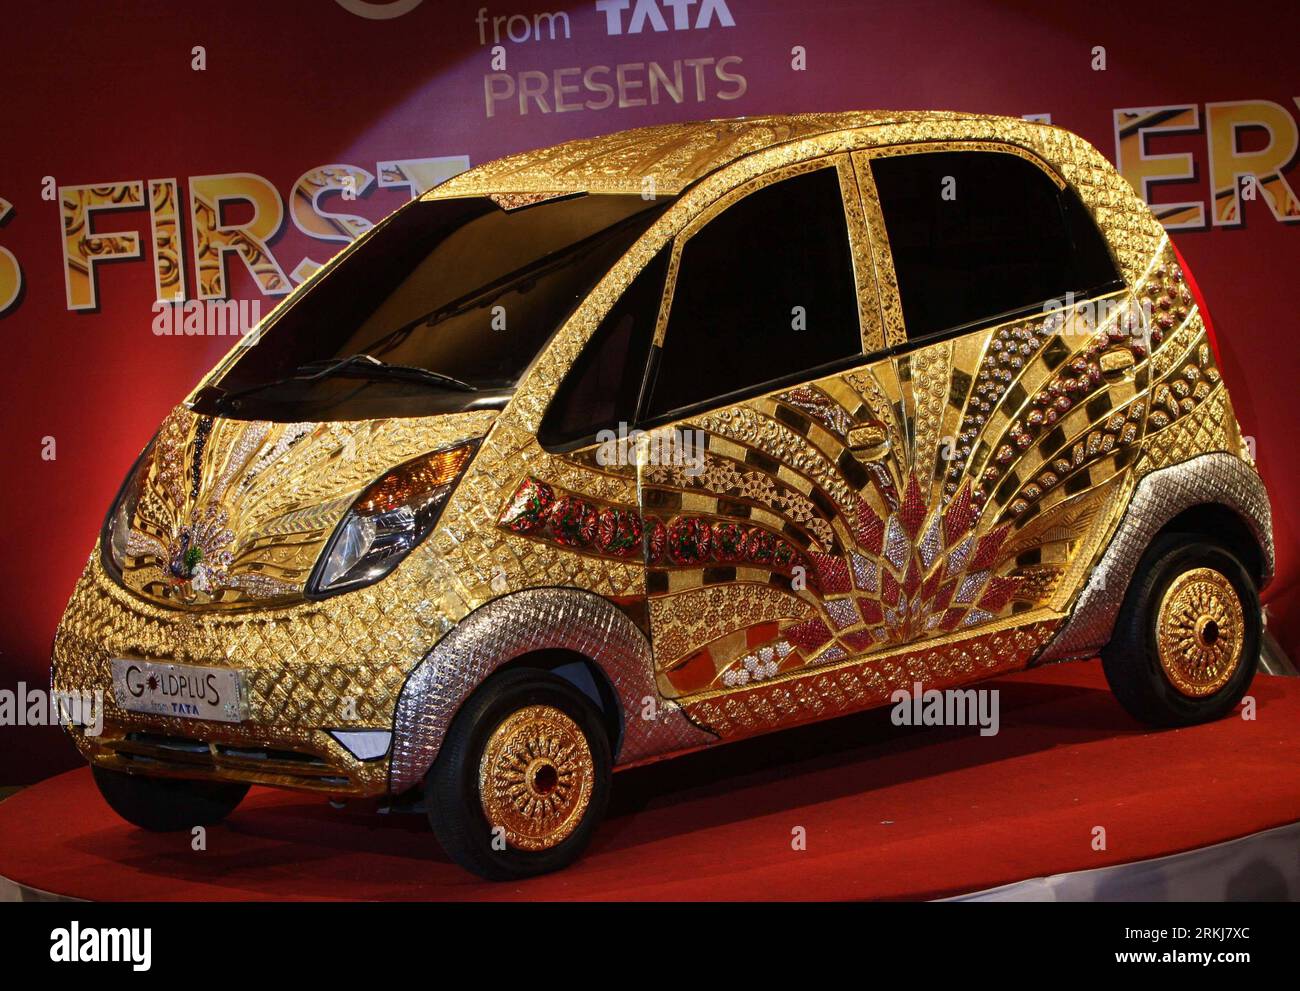 Bildnummer: 56031057  Datum: 19.09.2011  Copyright: imago/Xinhua (110919) -- MUMBAI, Sept. 19, 2011 (Xinhua) -- The World s first Gold jewelry car, claimed by Tata, is seen during an unveiling ceremony in Mumbai, India, Sept. 19, 2011. About 80 kg of 22 karat gold, approximately 15 kg of silver and 10,000 gemstones were used to decorate the Tata Nano car. (Xinhua/Stringer) INDIA-MUMBAI-TATA-GOLD JEWELRY CAR PUBLICATIONxNOTxINxCHN Wirtschaft kurios Aufmacher premiumd x2x xsk 2011 quer o0 Silber, Edelsteine, Auto, Fahrzeug, Goldplus, Tata, Objekte, Luxus     56031057 Date 19 09 2011 Copyright Im Stock Photo